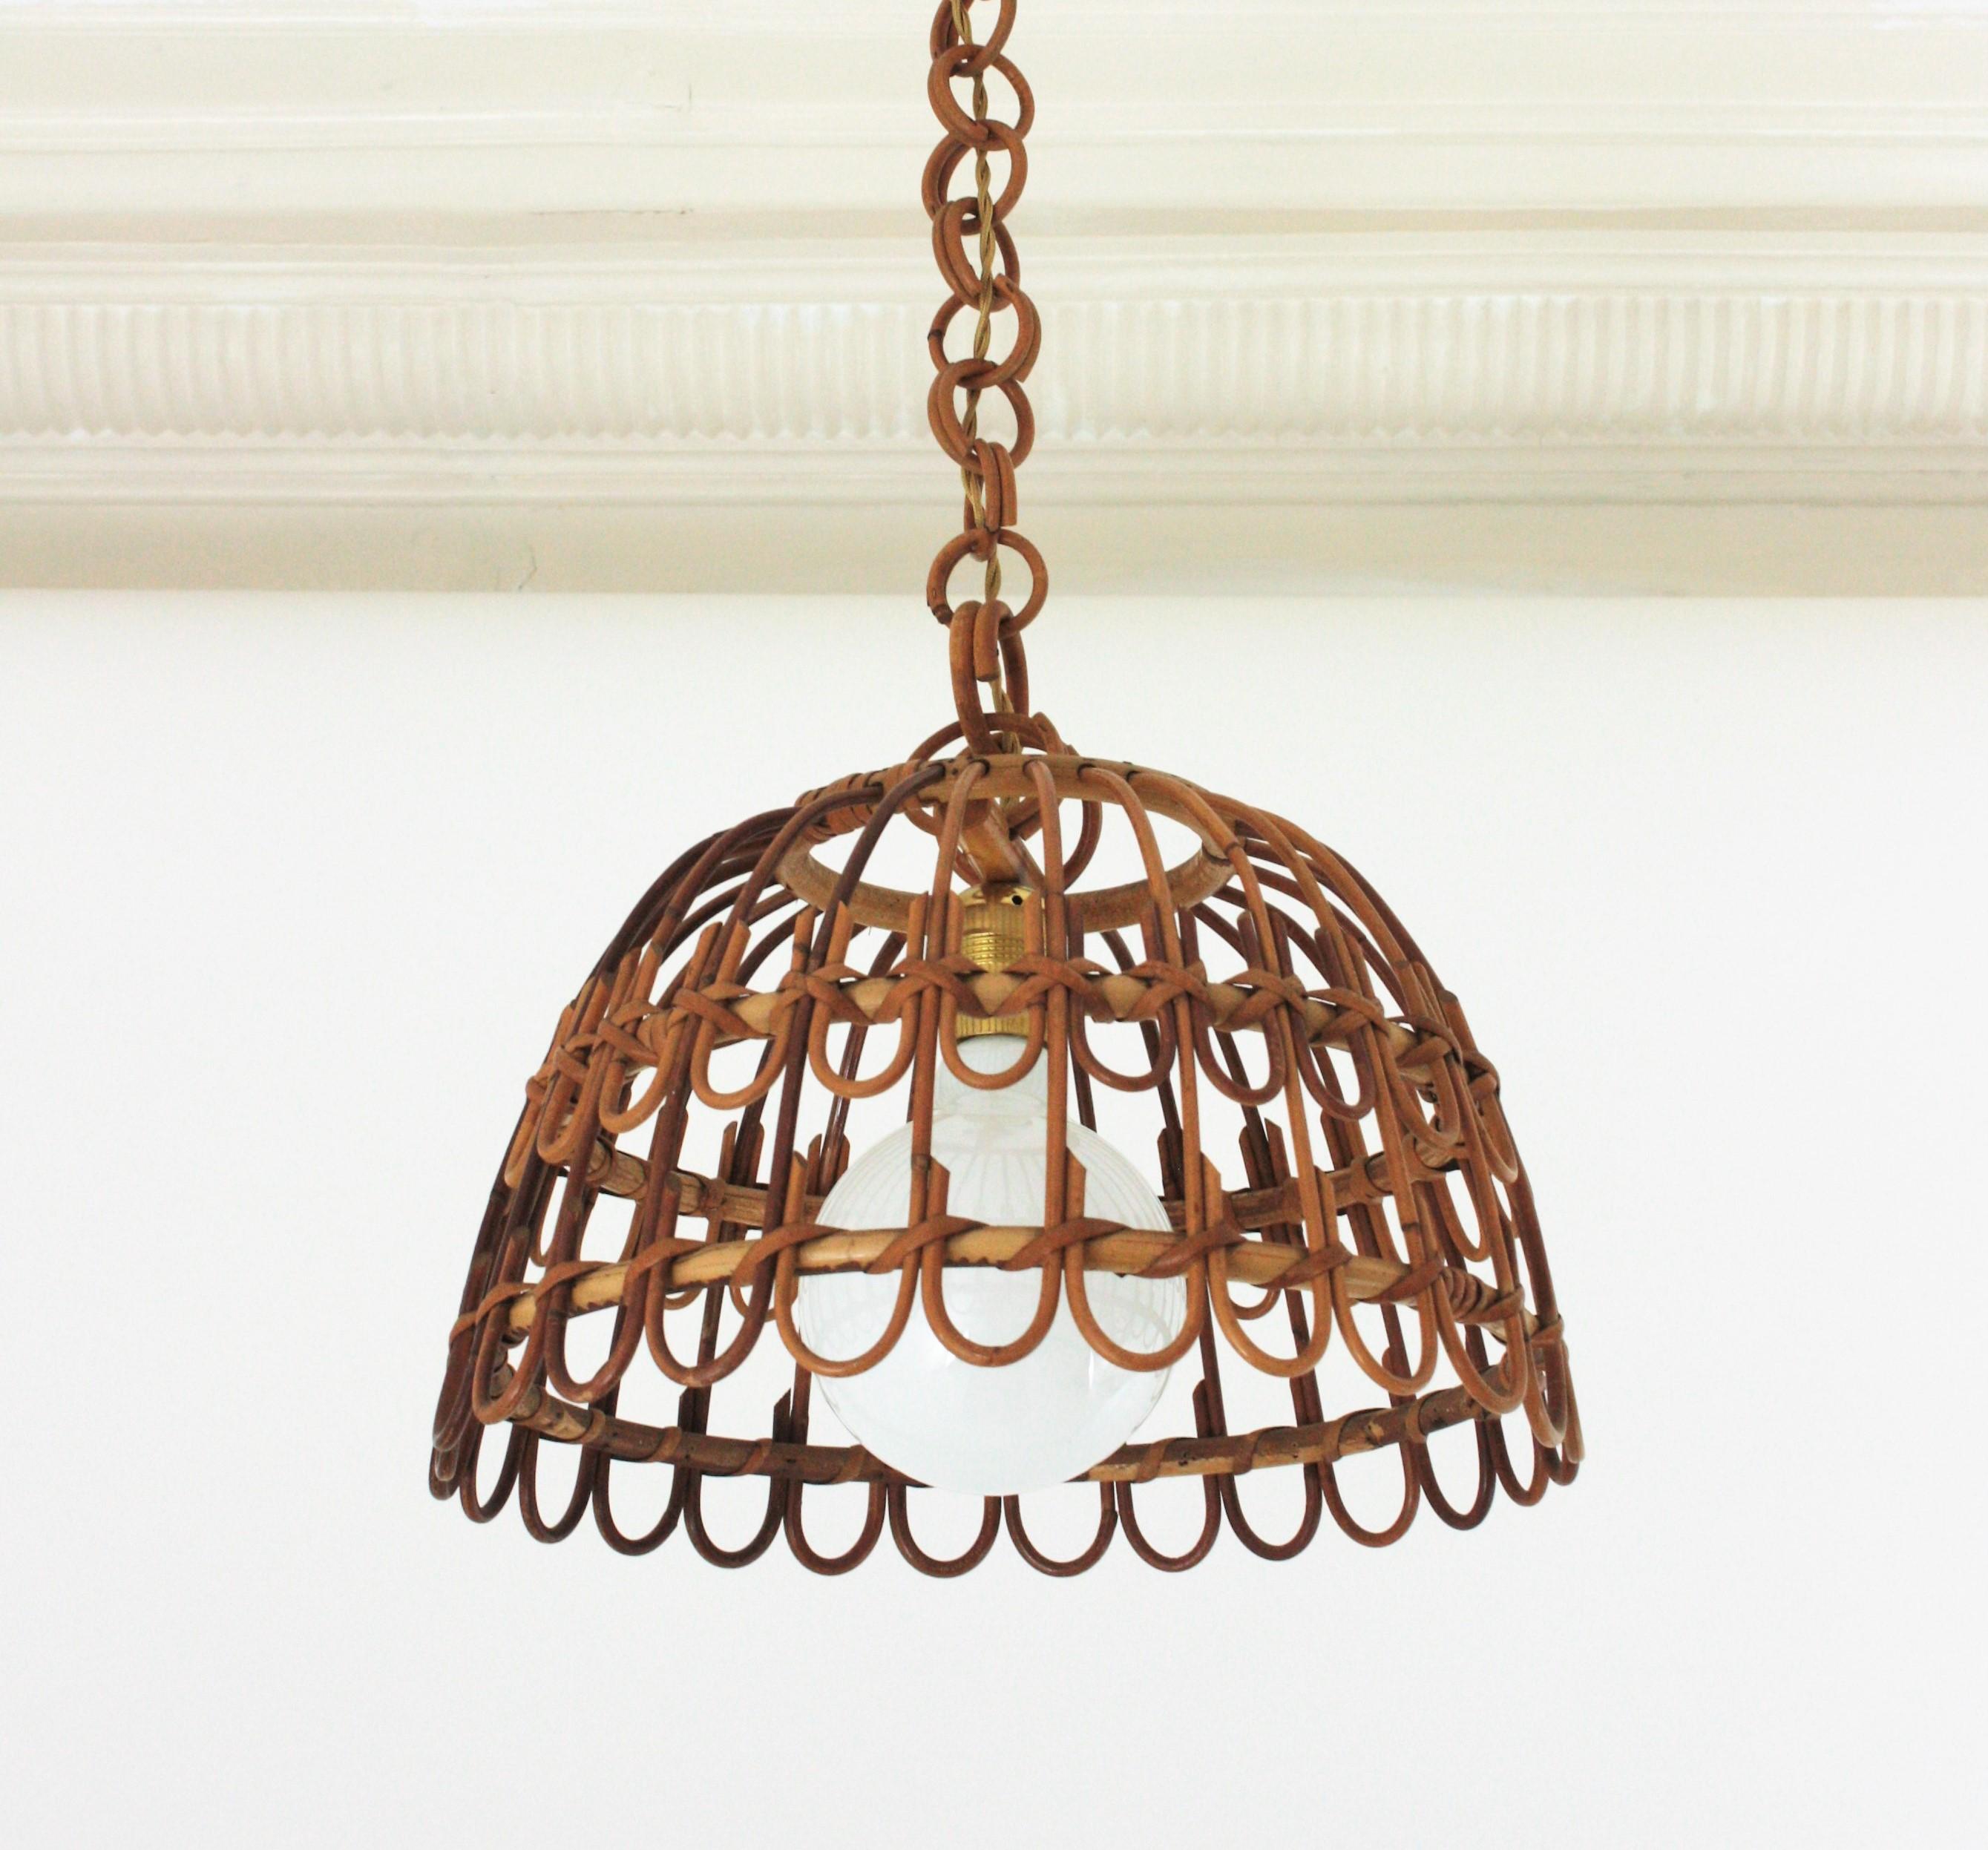 Eyecatching handcrafted rattan pendant light with geometric petal design. Spain, 1960s. 
This suspension lamp has a bell shaped lampshade hanging from a rattan / bamboo chain topped by a wicker wrapped canopy. The length of the chain can be